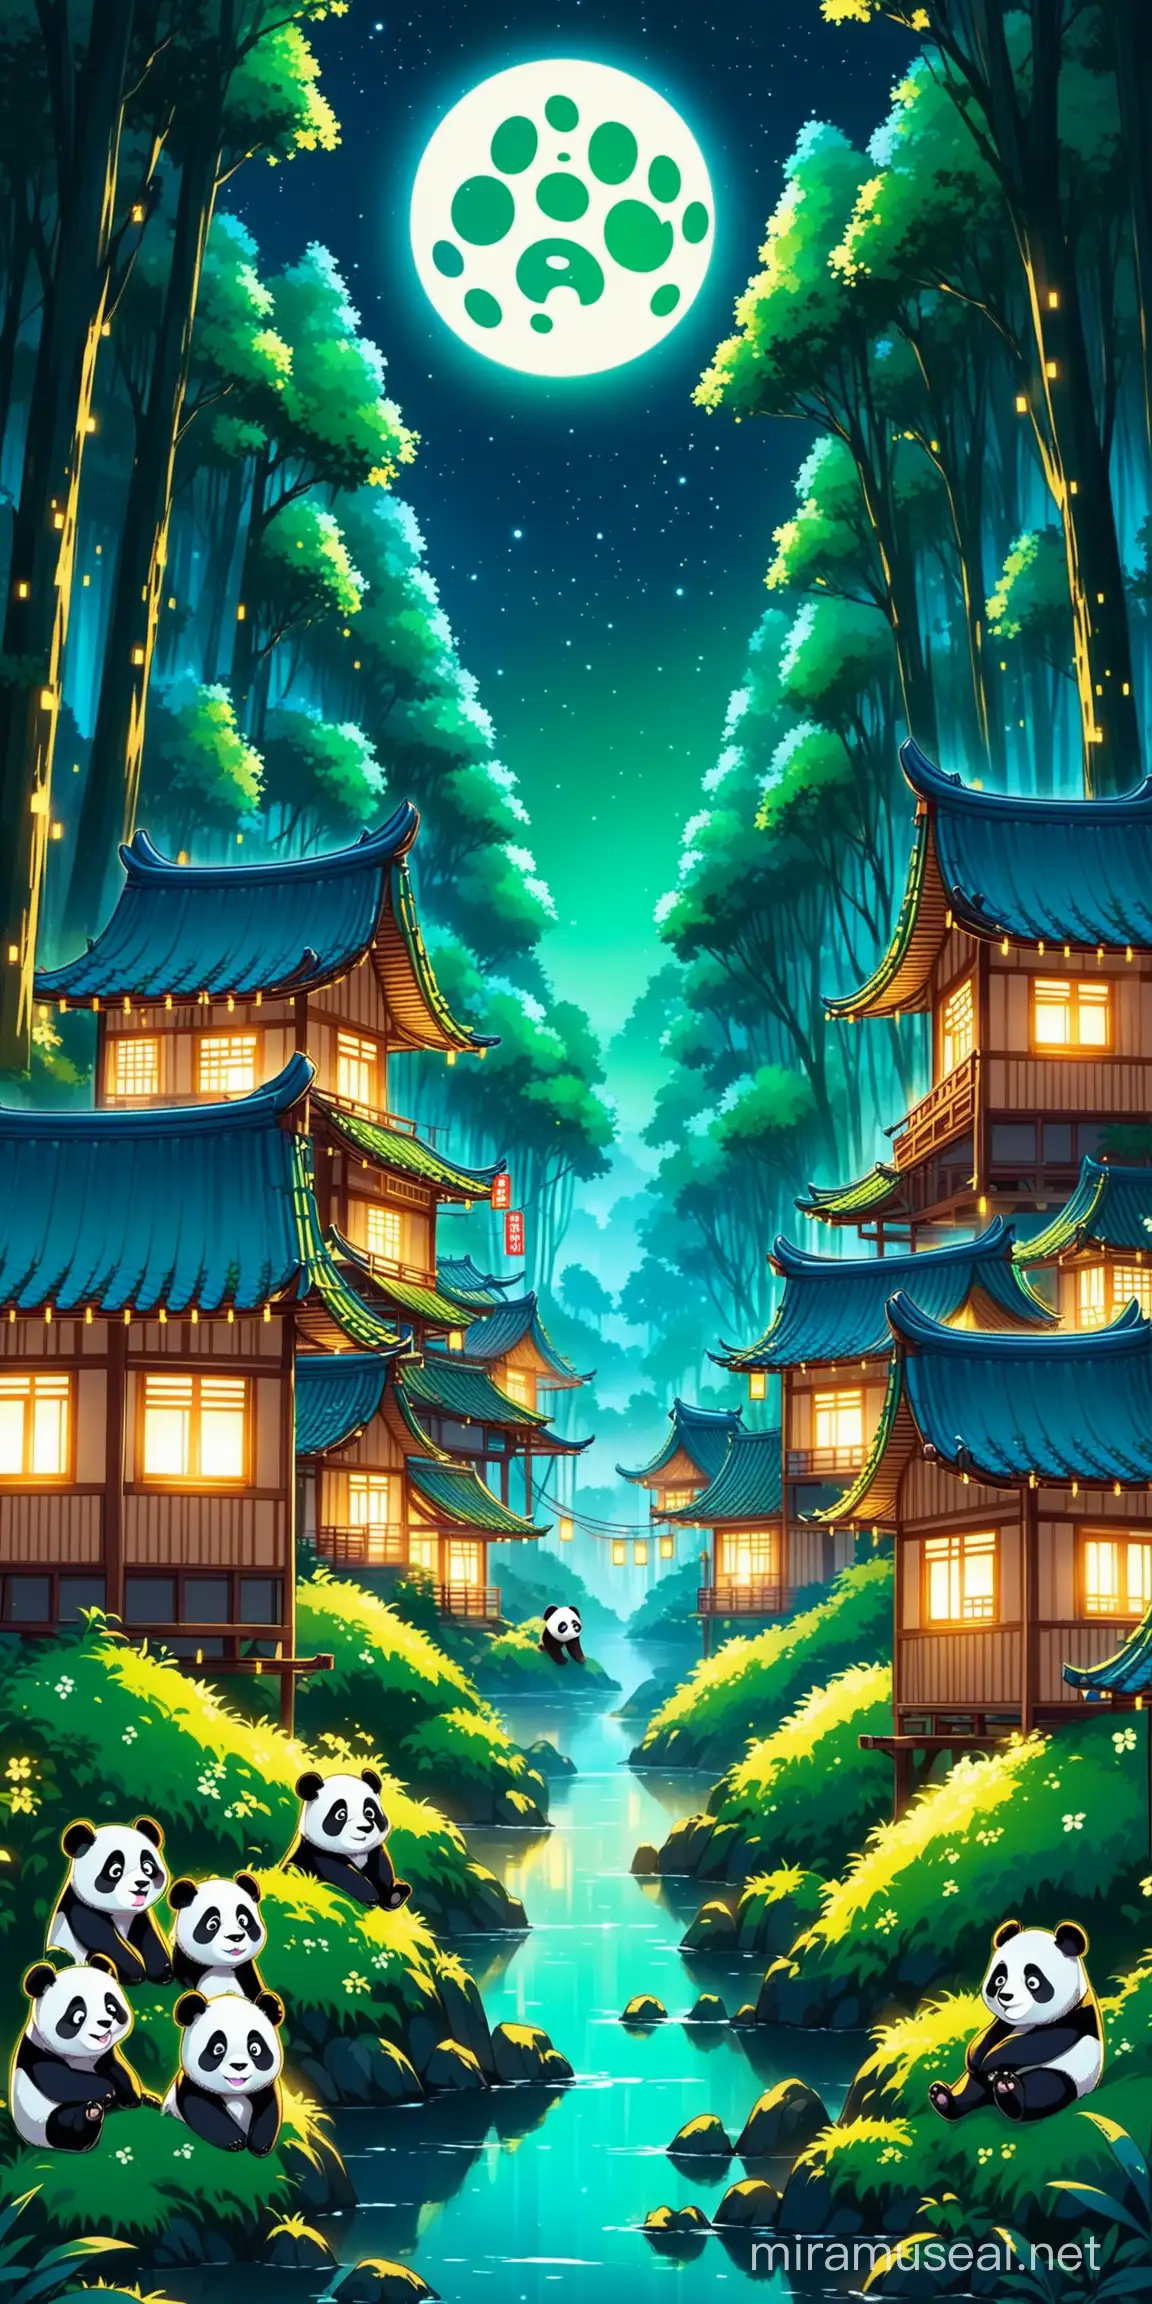 Enchanted Night Forest Pandas Amidst a Glowing Community of Houses